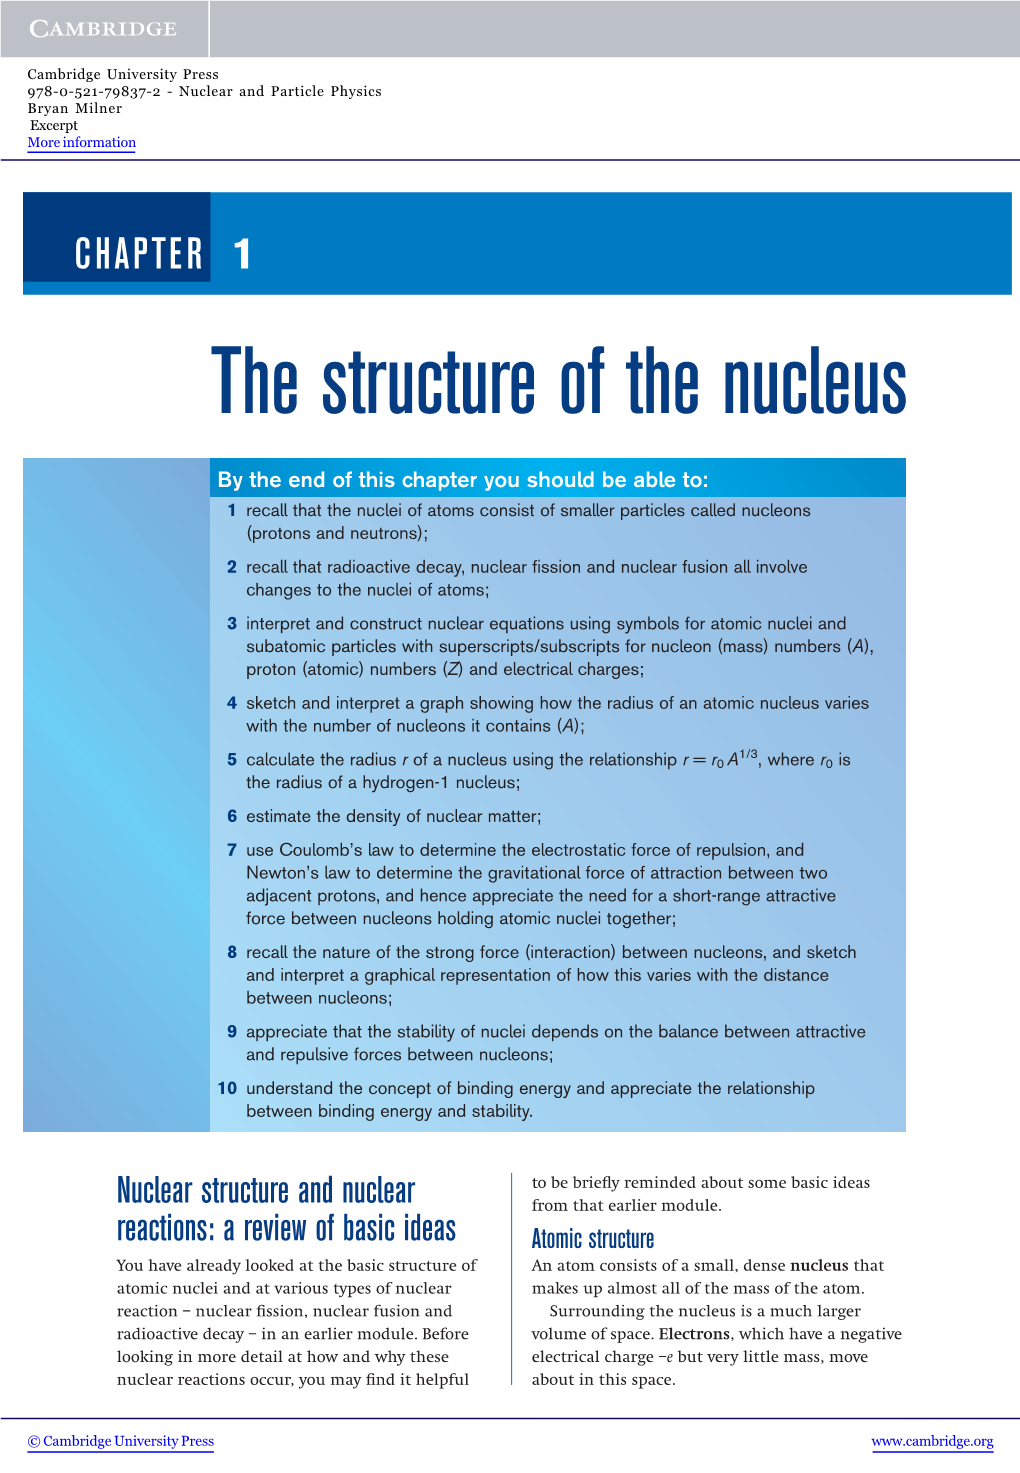 The Structure of the Nucleus